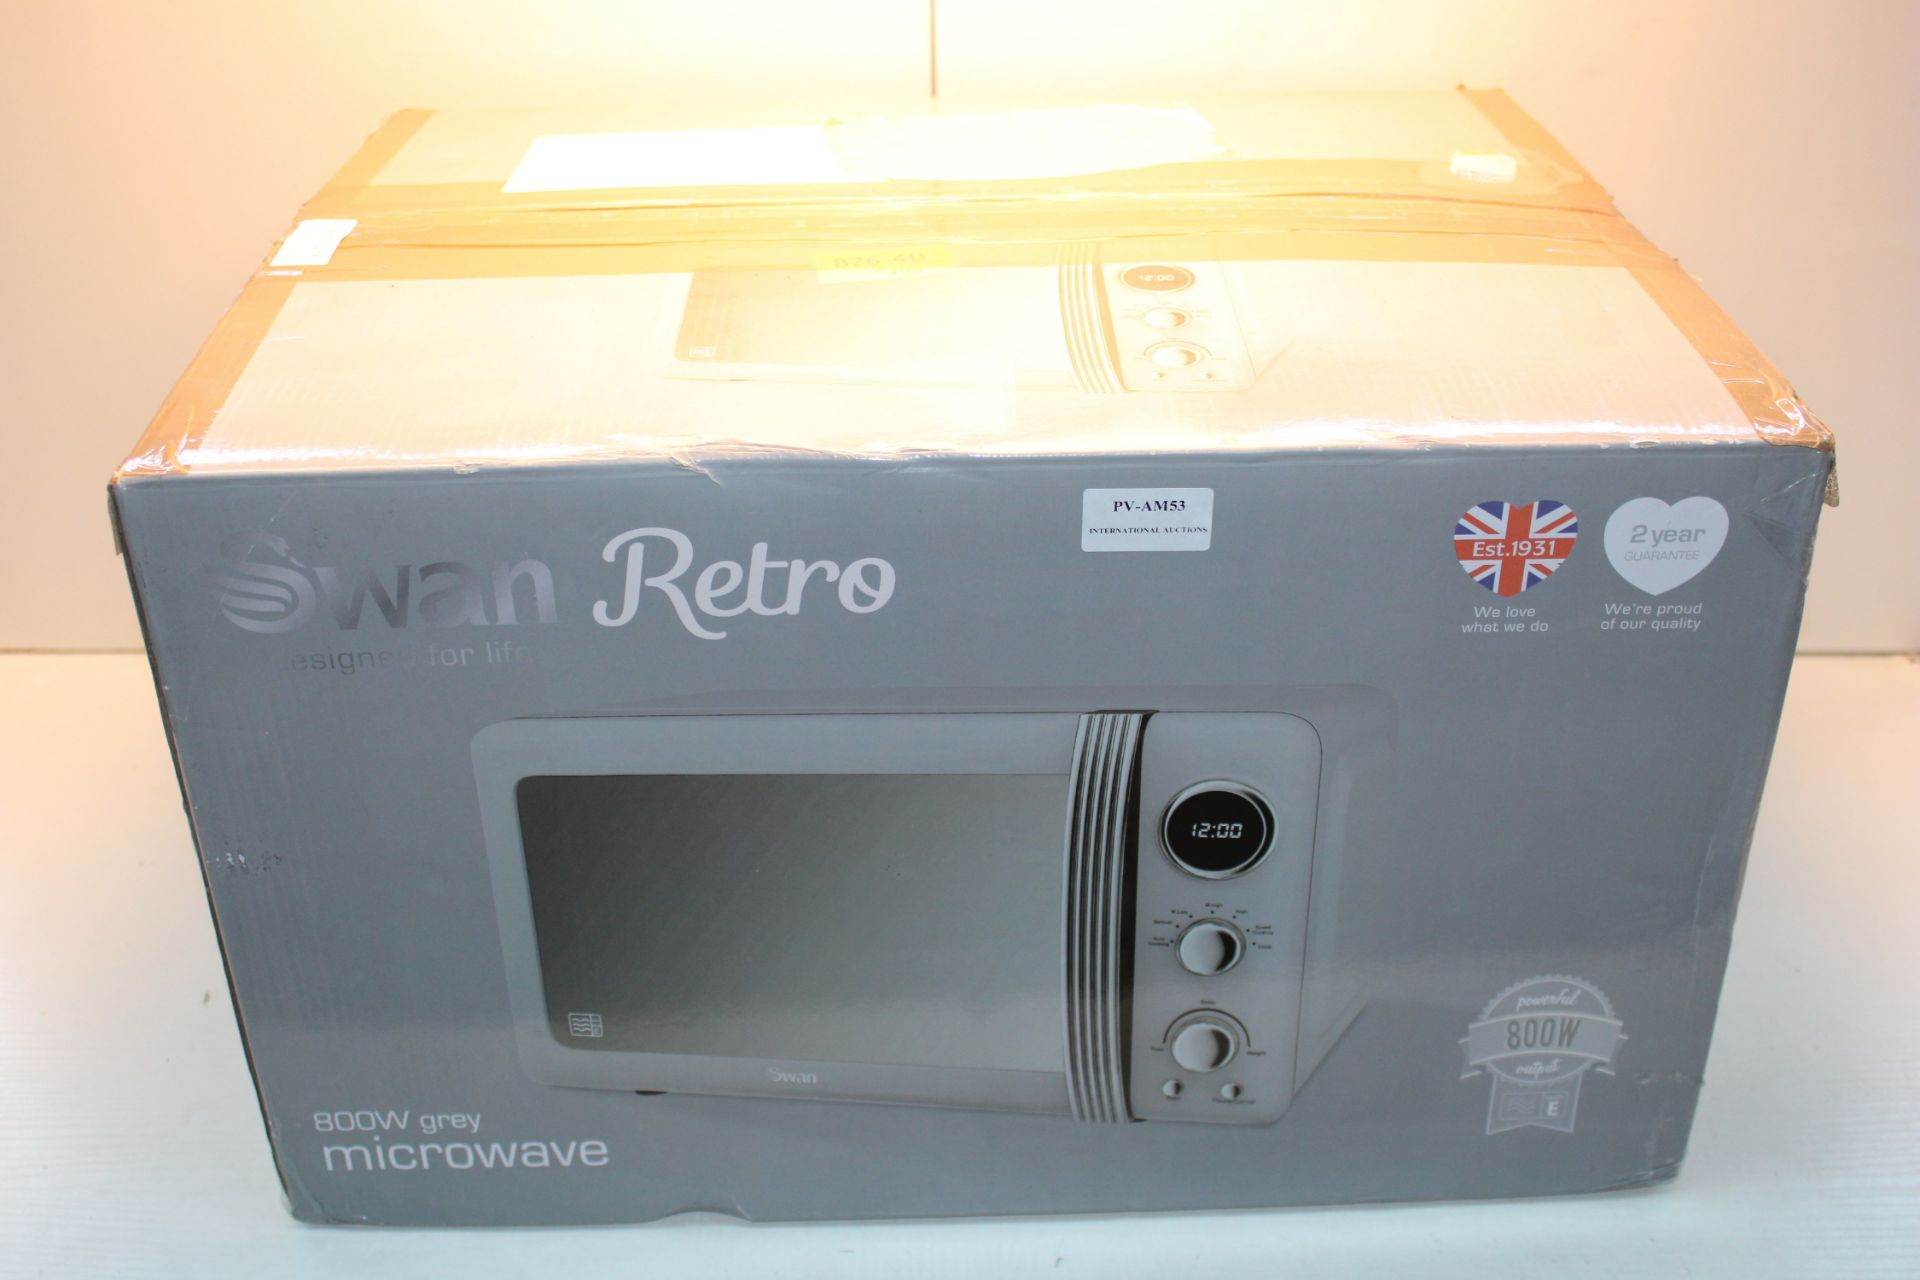 BOXED SWAN RETRO MICROWAVE OVEN Condition ReportAppraisal Available on Request- All Items are